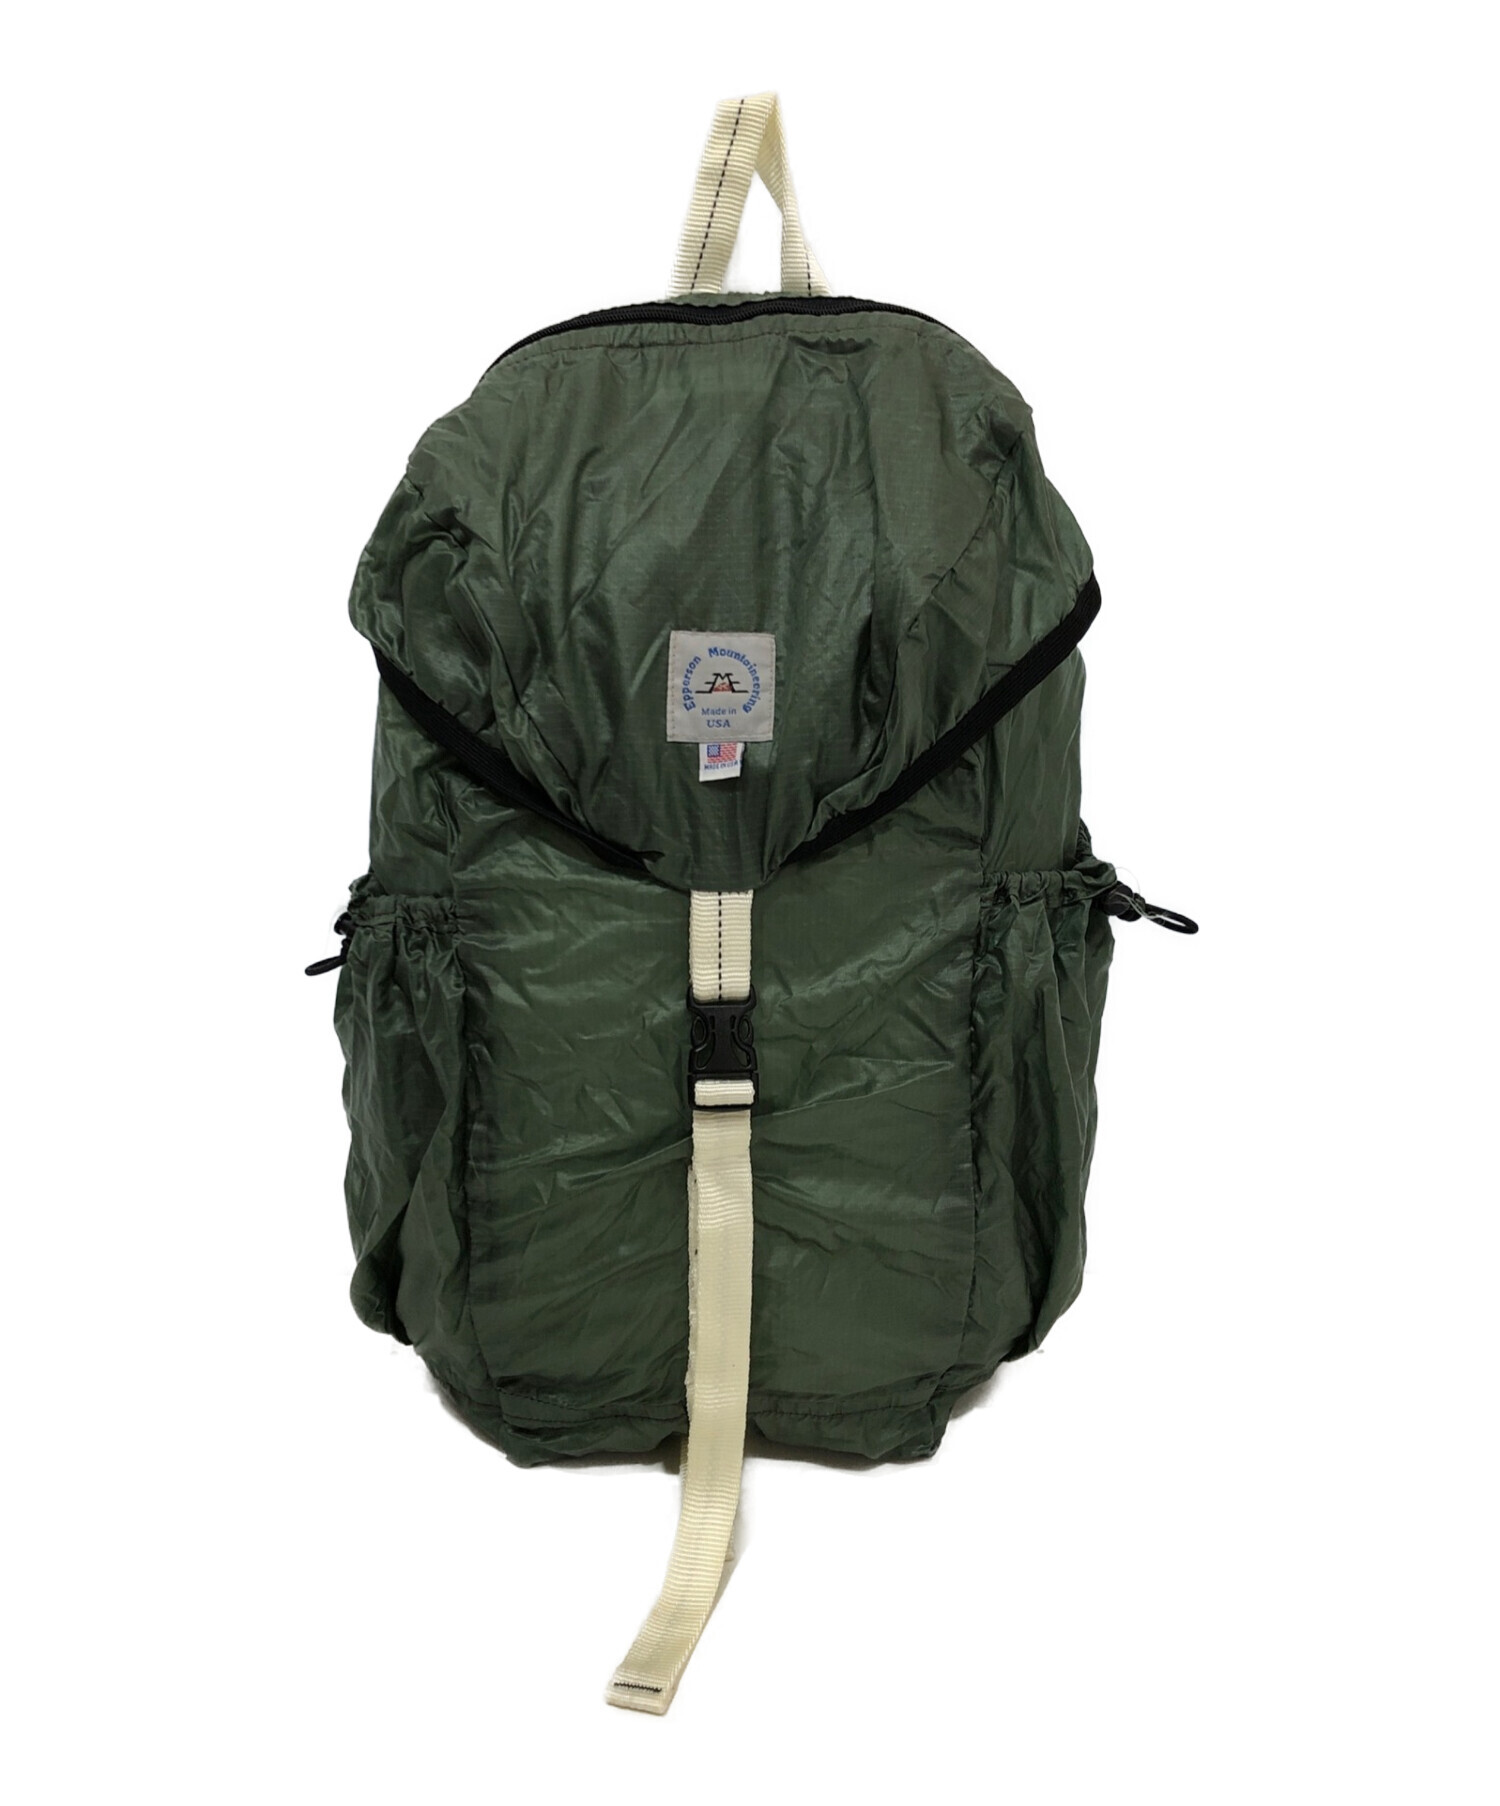 Epperson Mountaineering×Ron Herman (エパーソンマウンテニアリング) RHC別注Packable Backpack  オリーブ